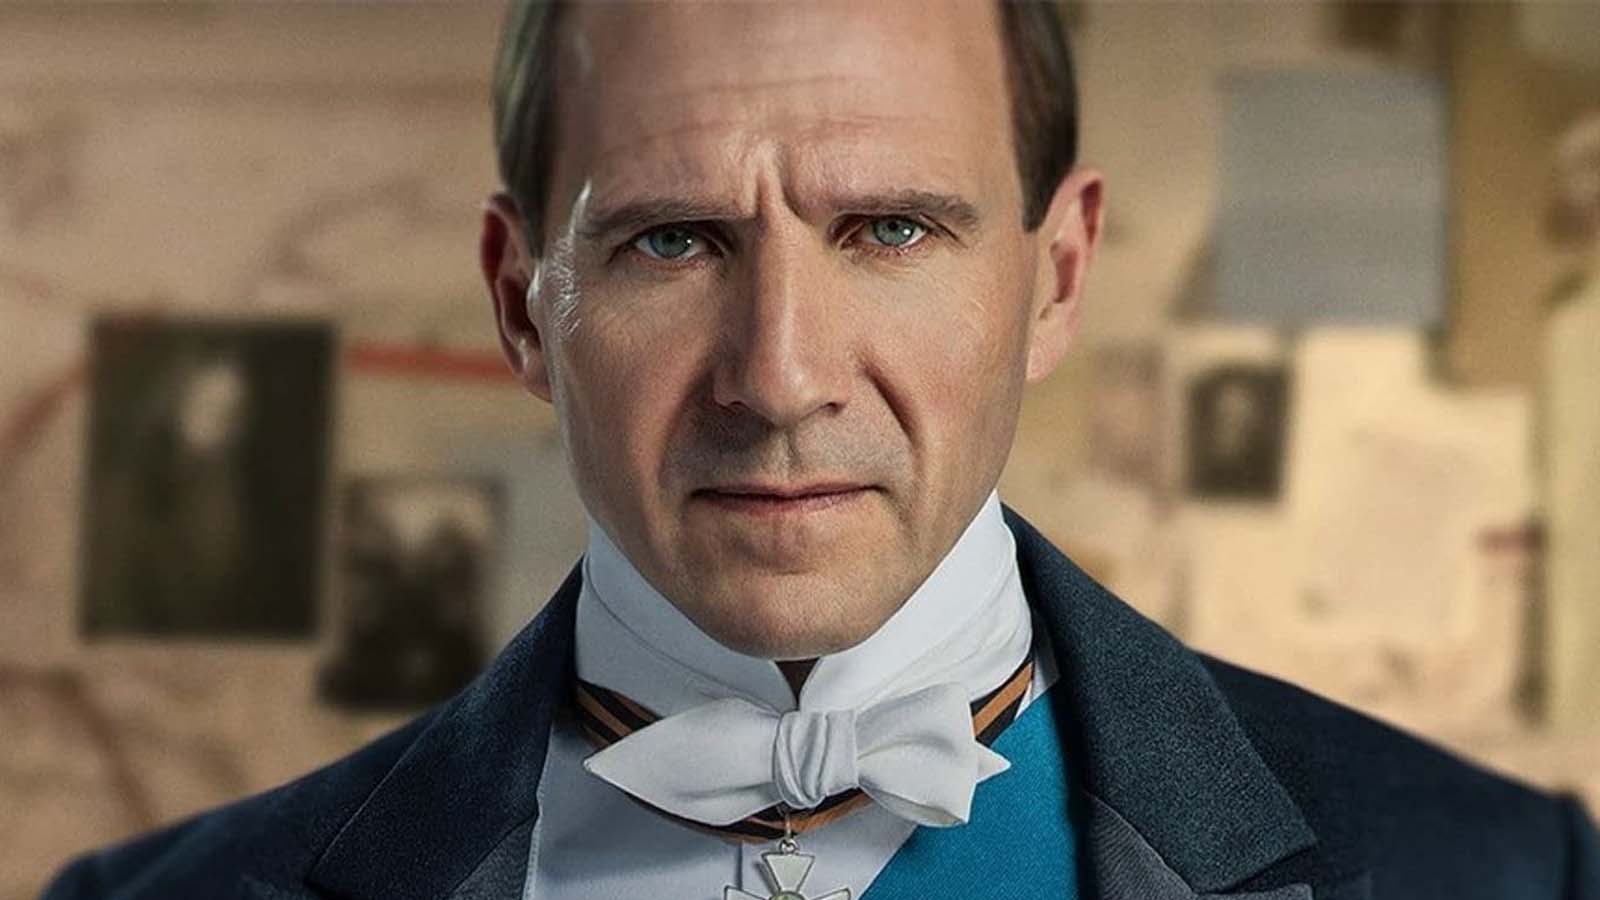 Ralph Fiennes plays the “unapologetically aristocratic” Duke of Oxford. Image © 20th Century Studios